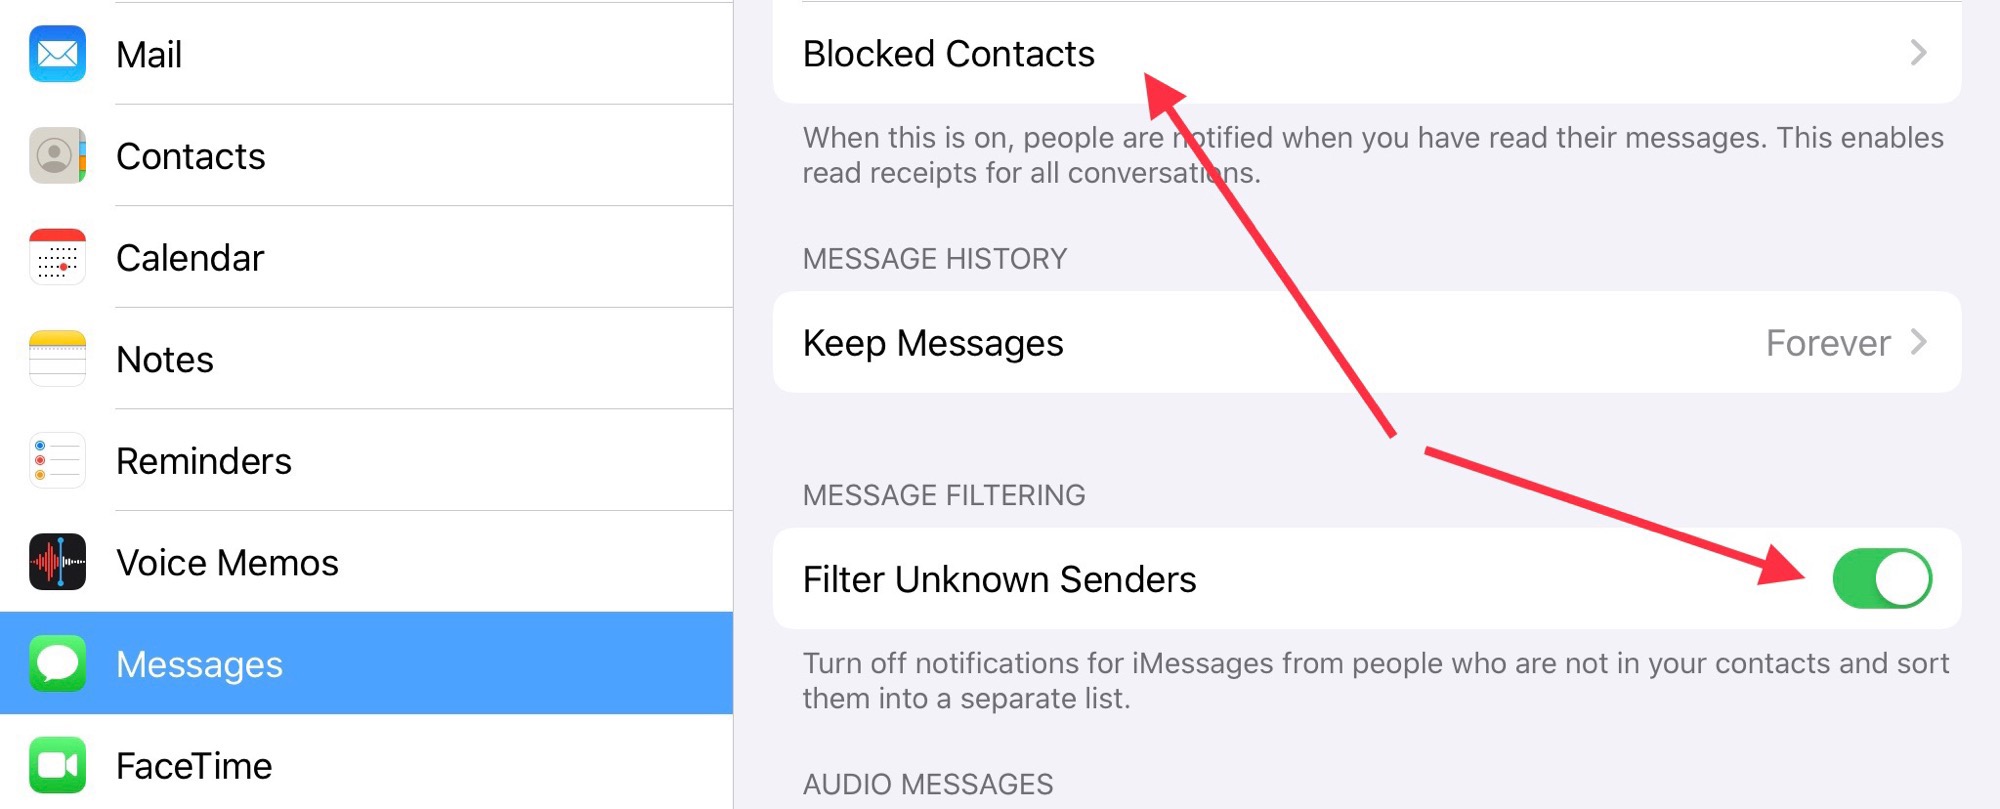 Block specific contacts, and filter unknown senders.